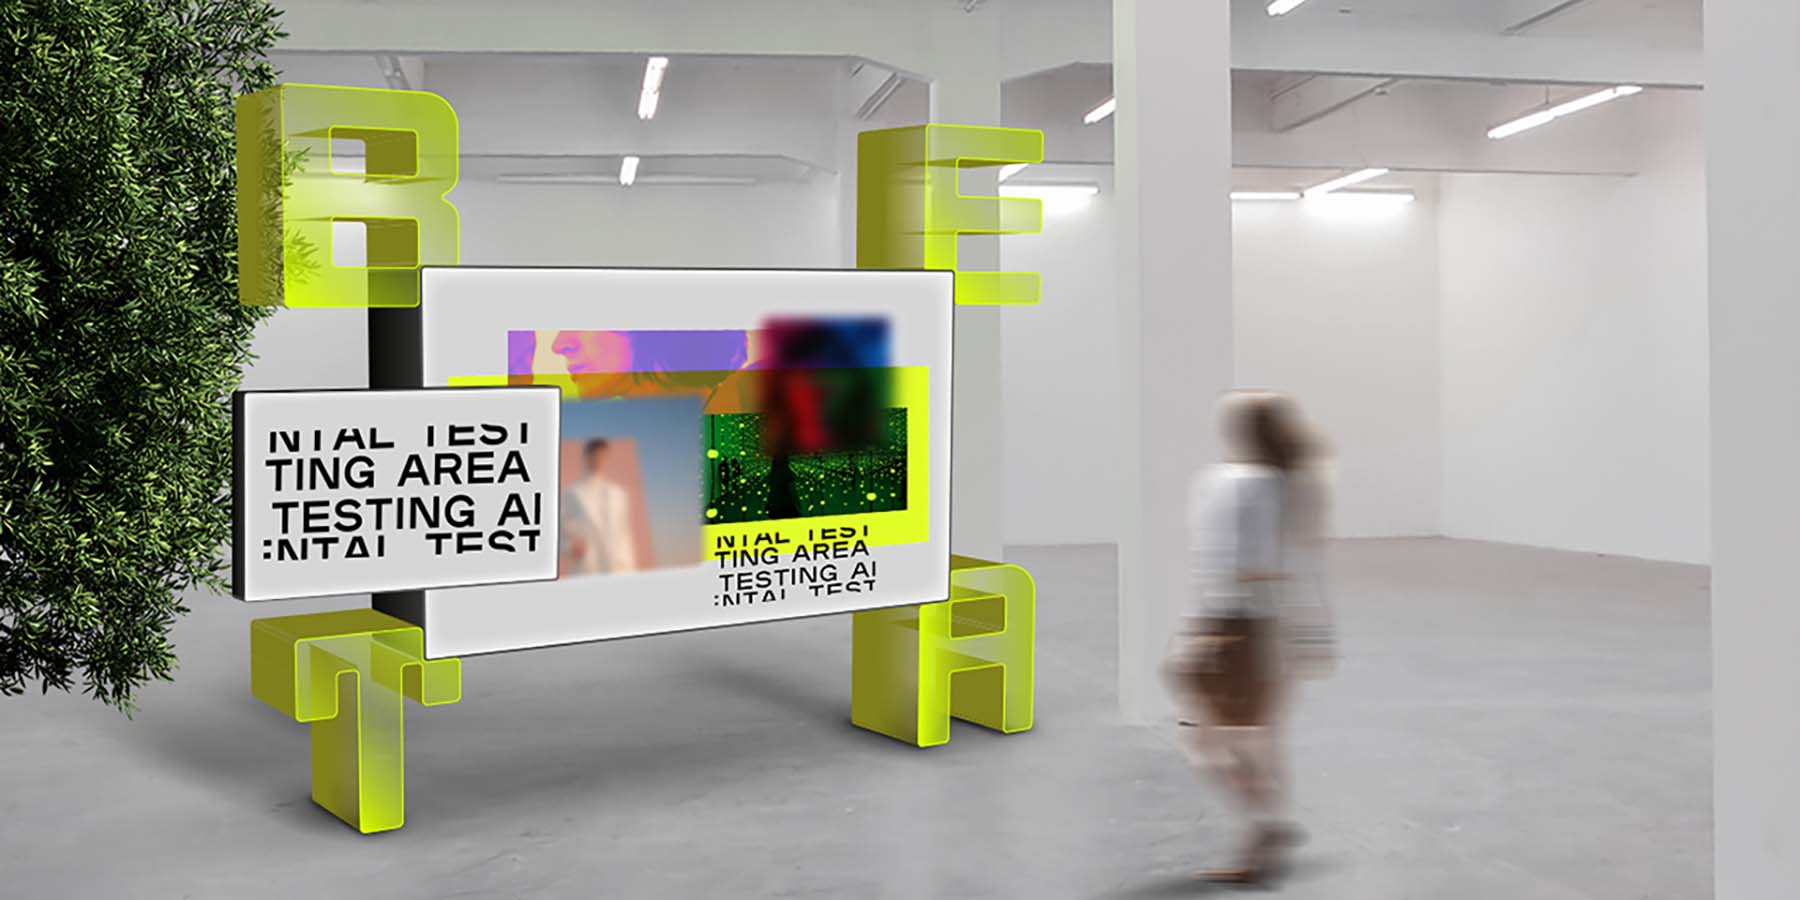 BETA by STH BNK Signage and Digital Display